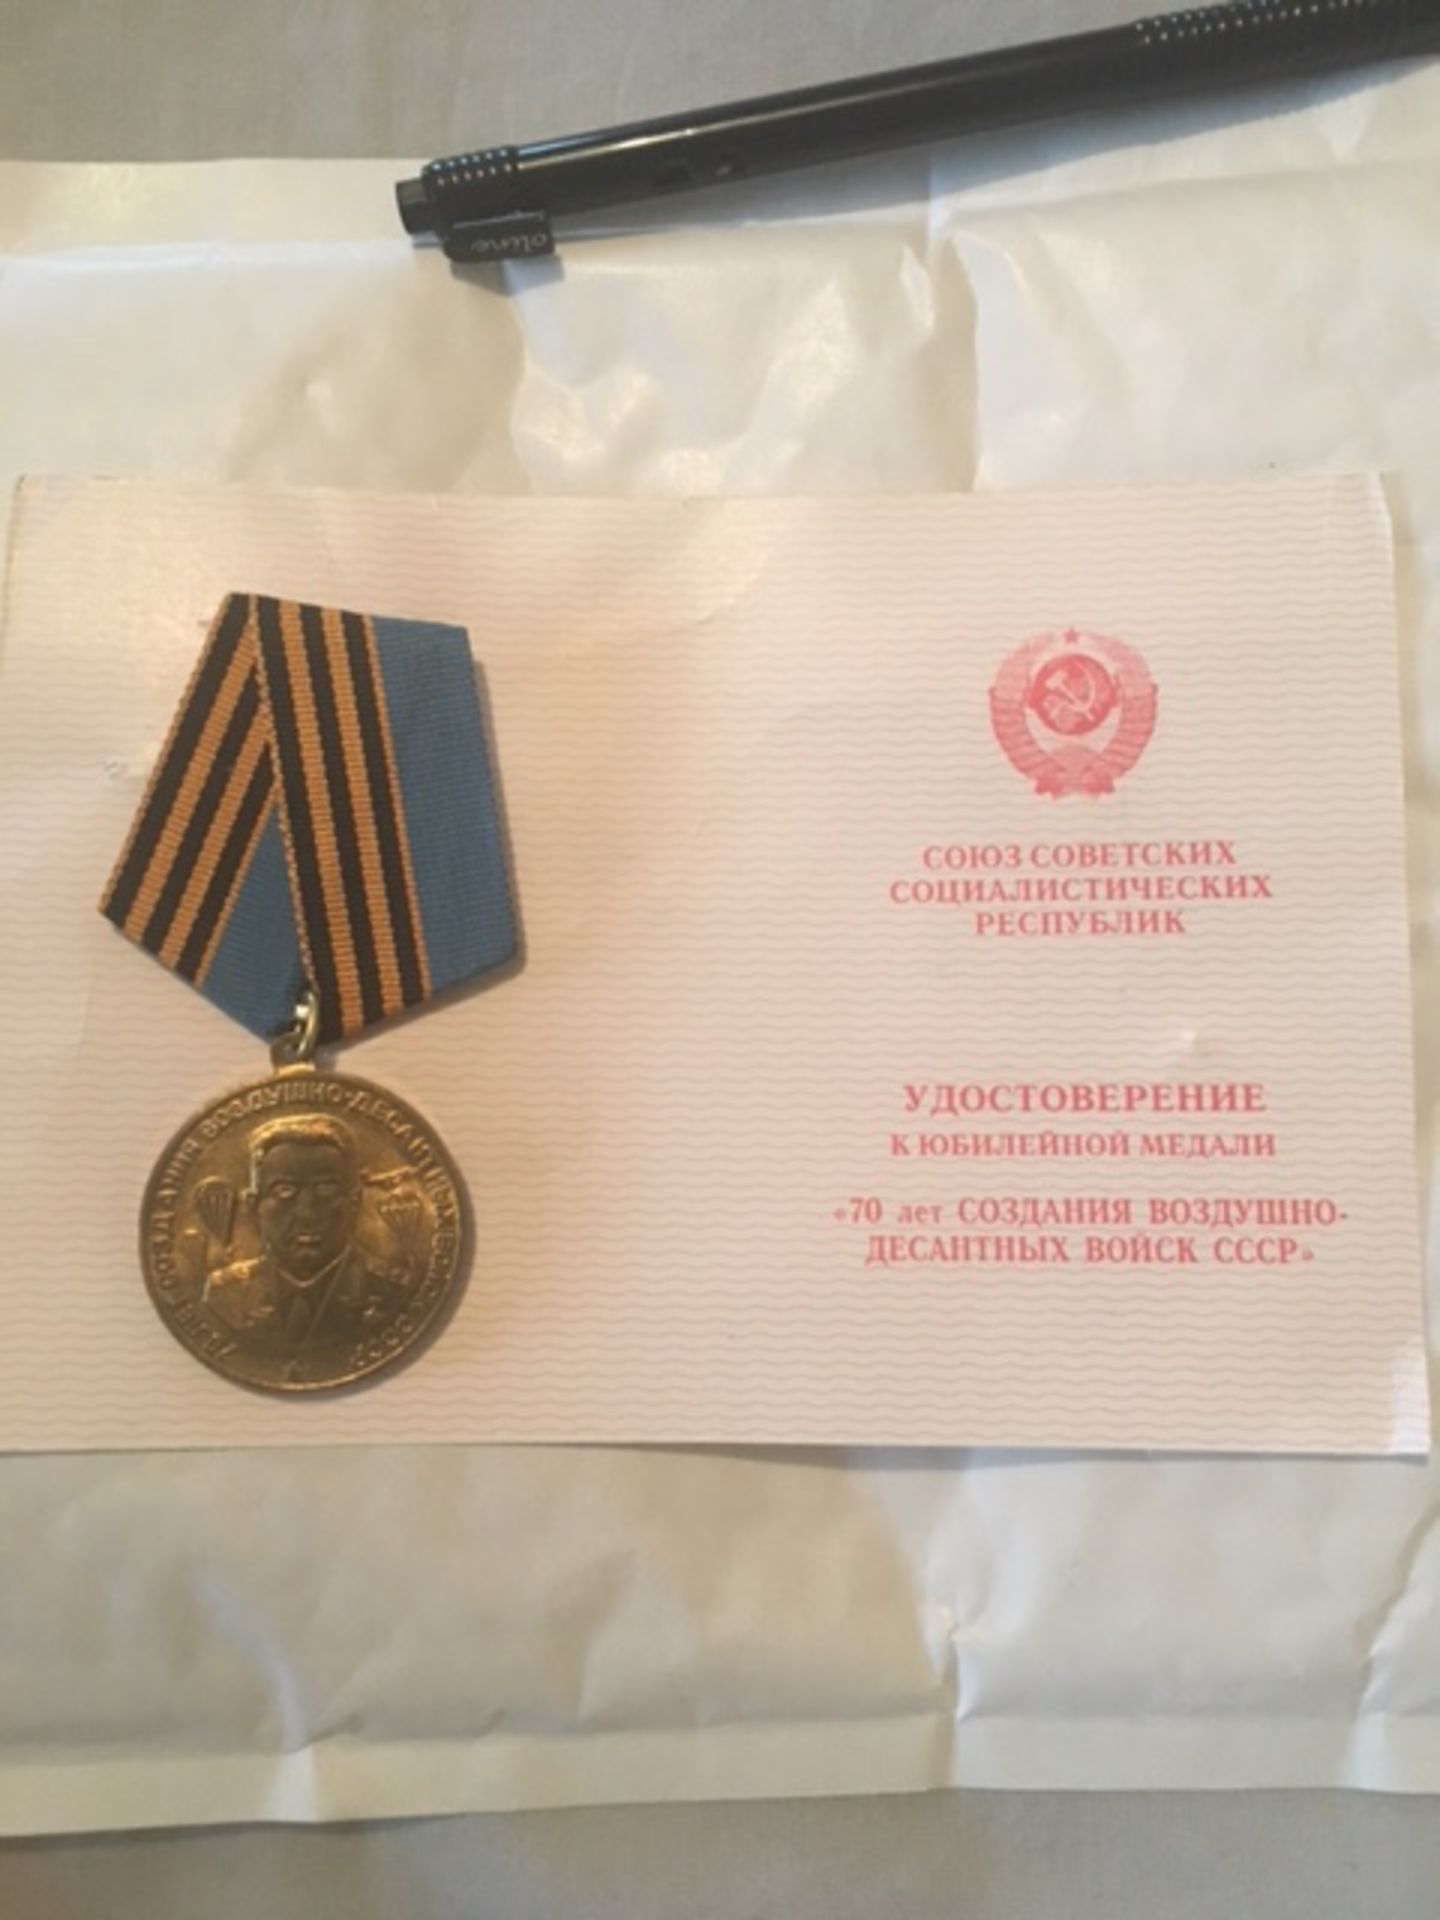 russian red army commander coin/card - Image 3 of 3